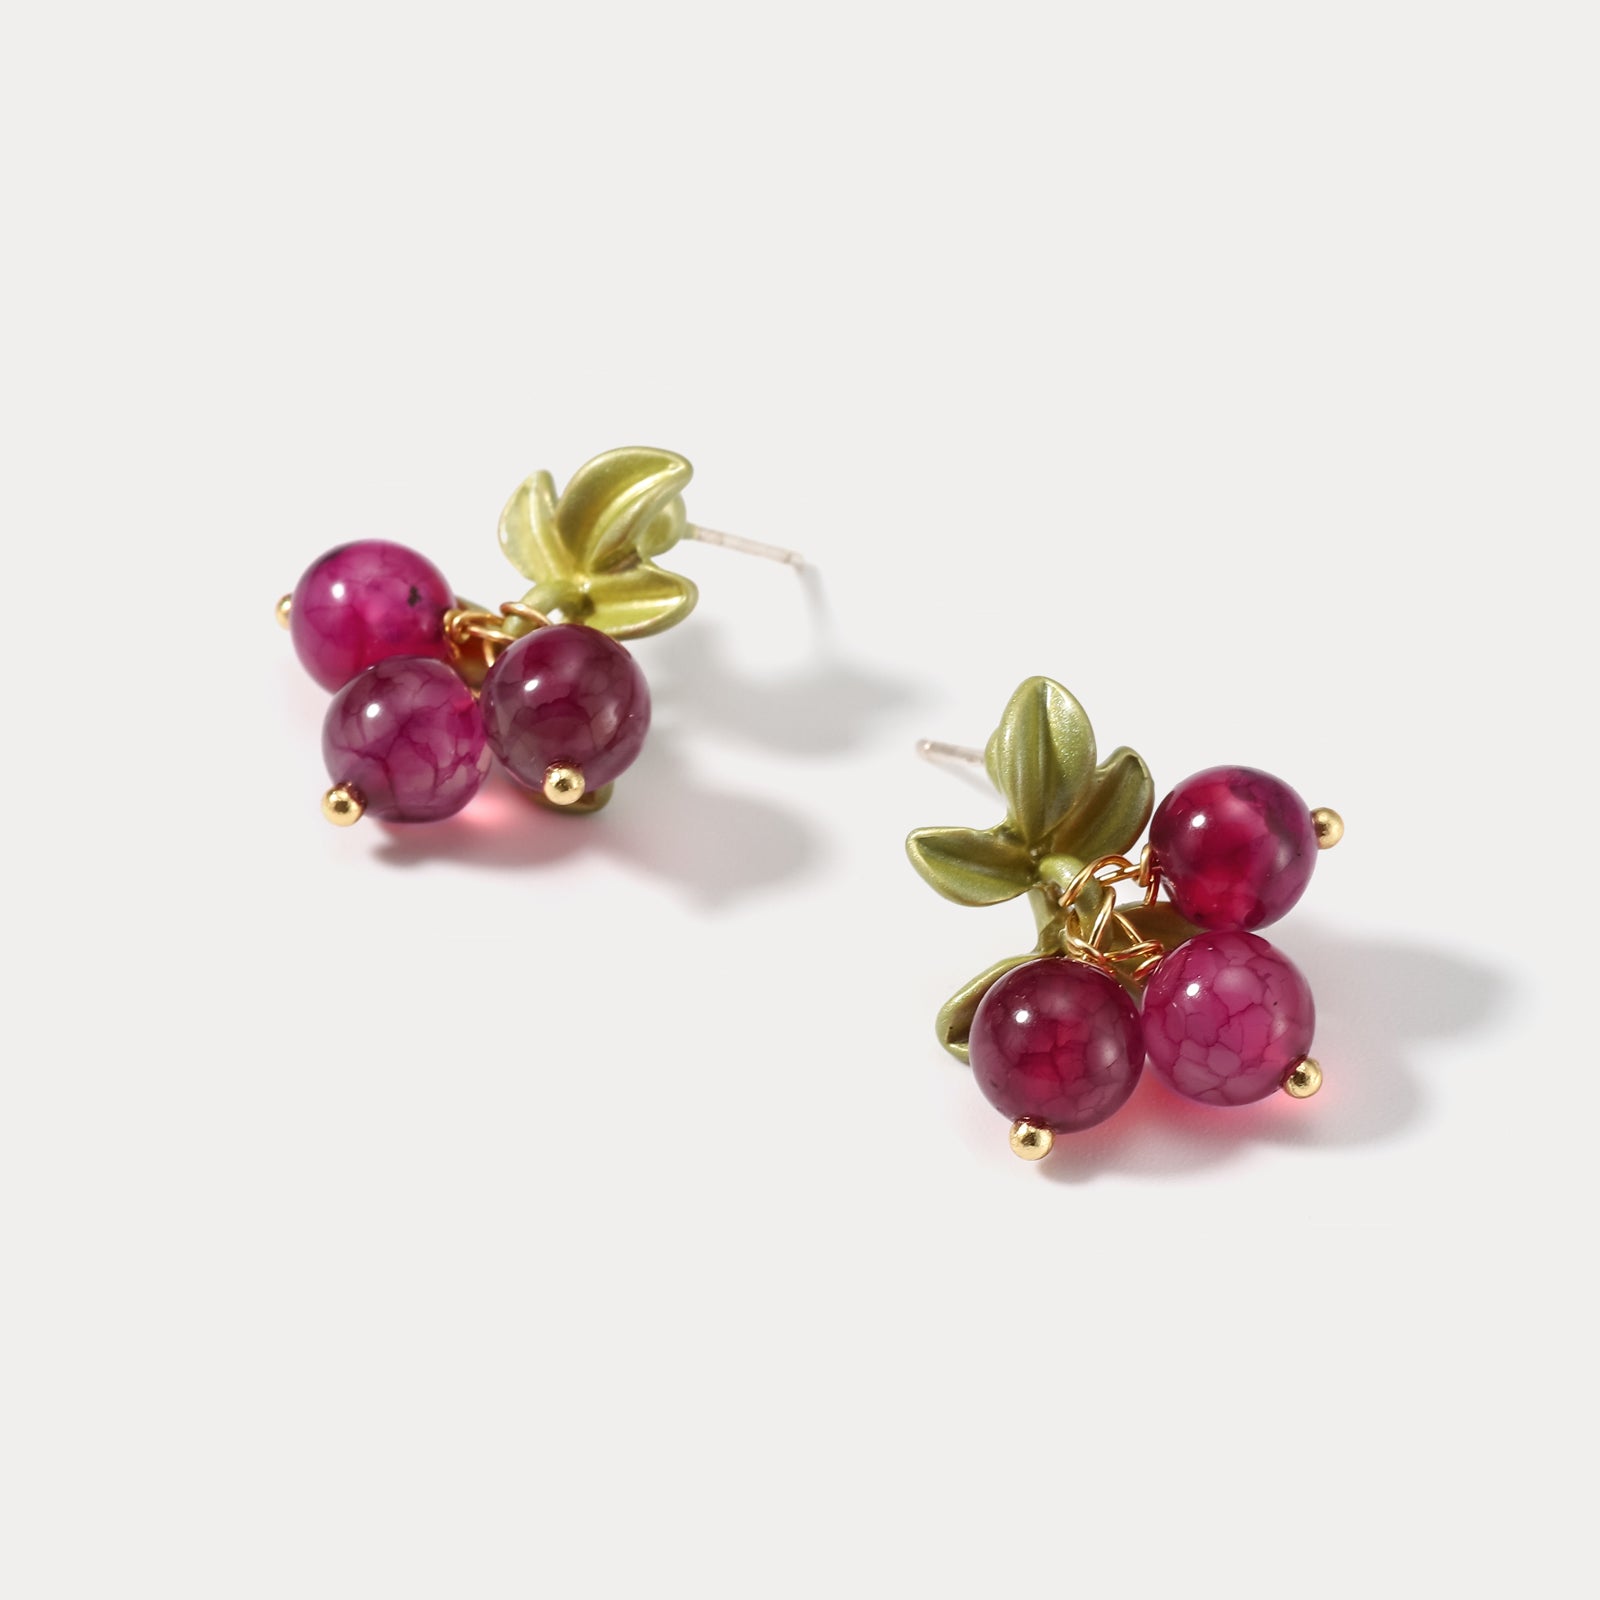 Cranberry Earring Orchard Jewelry